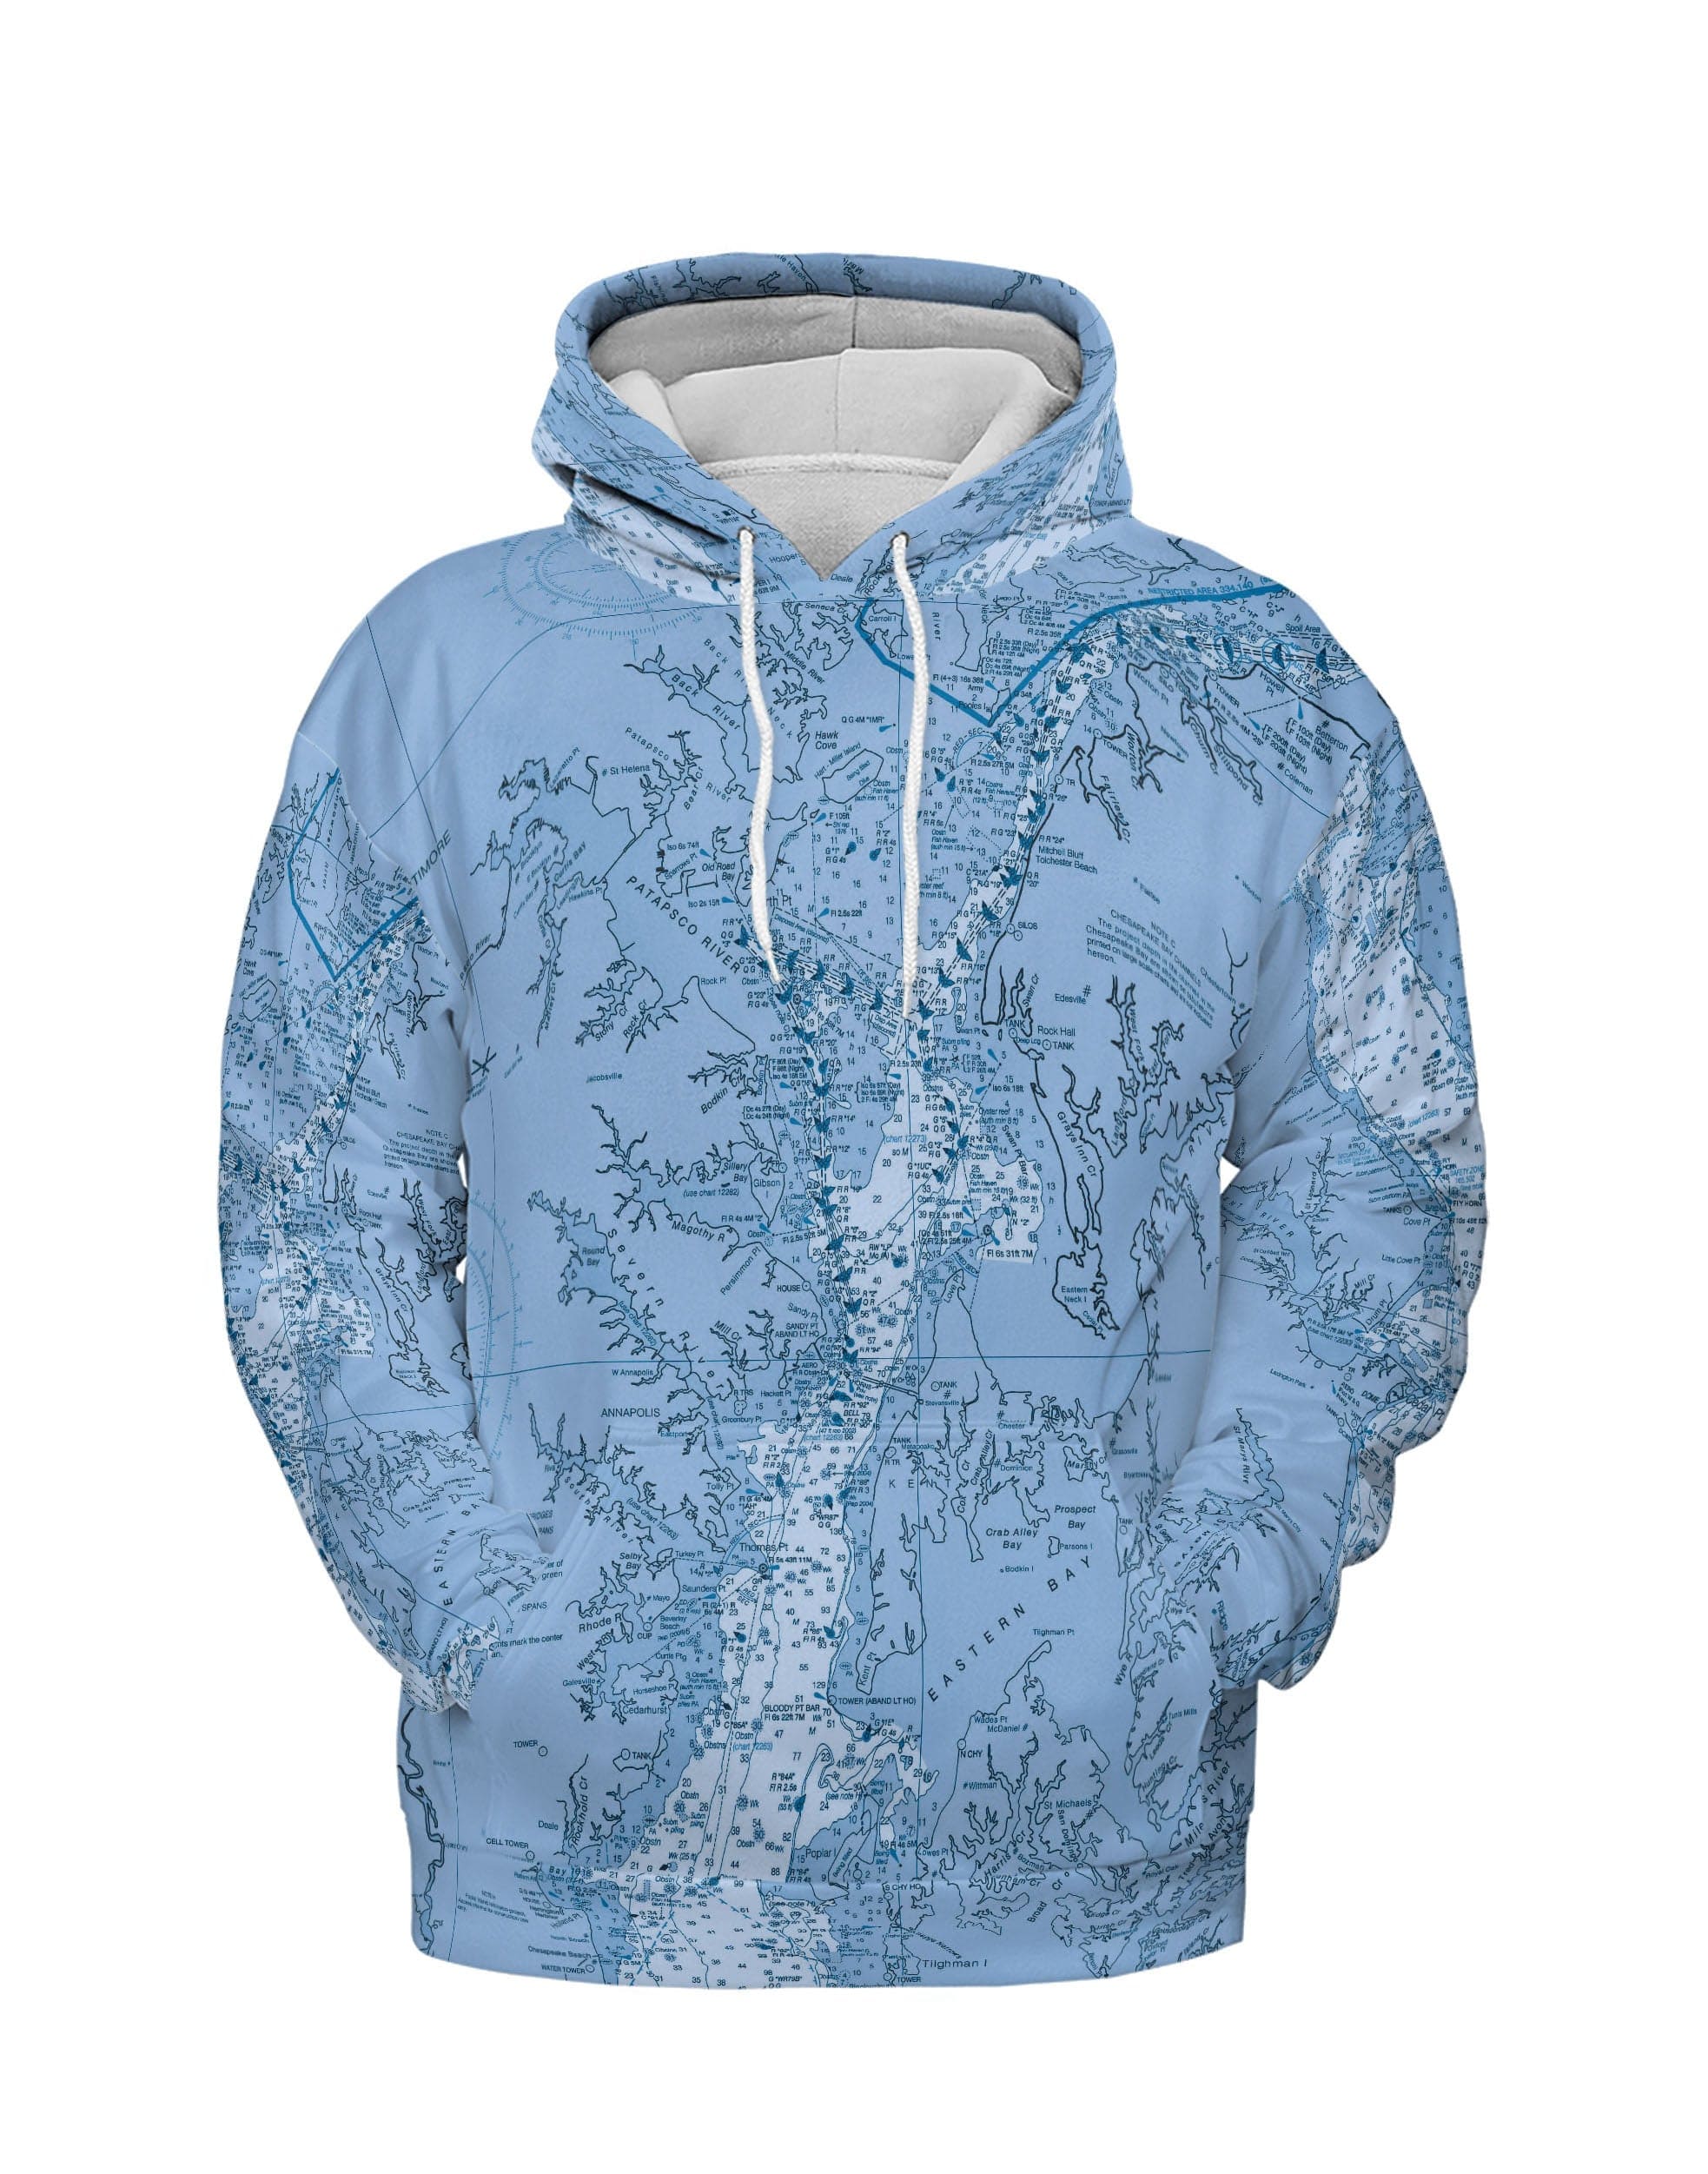 The Upper and Middle Chesapeake Bay Blues Lightweight Hoodie